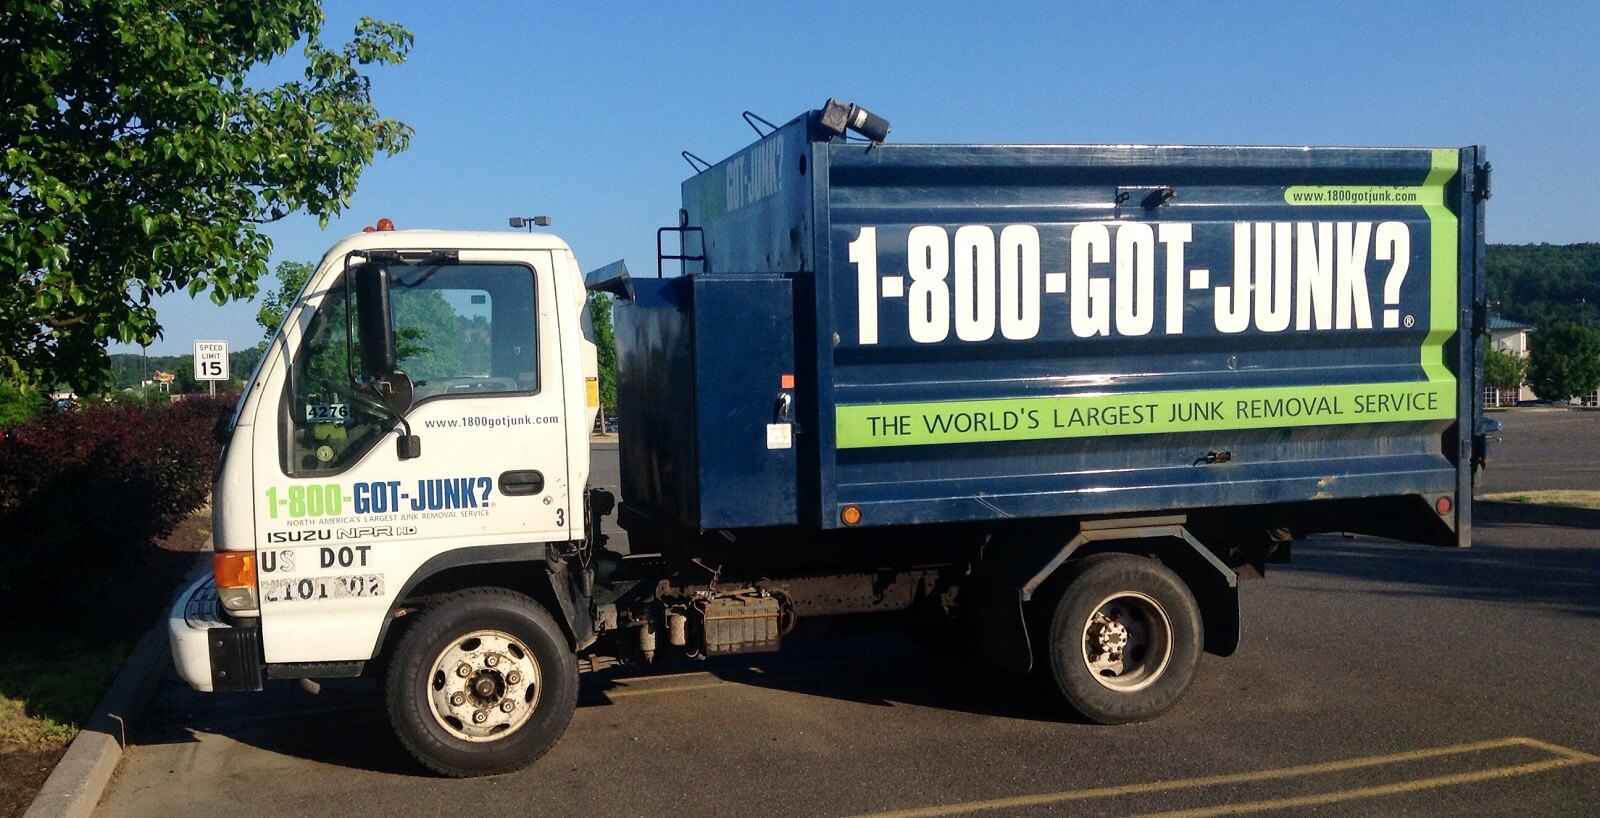 Trucks Painting For Junk Removal Business